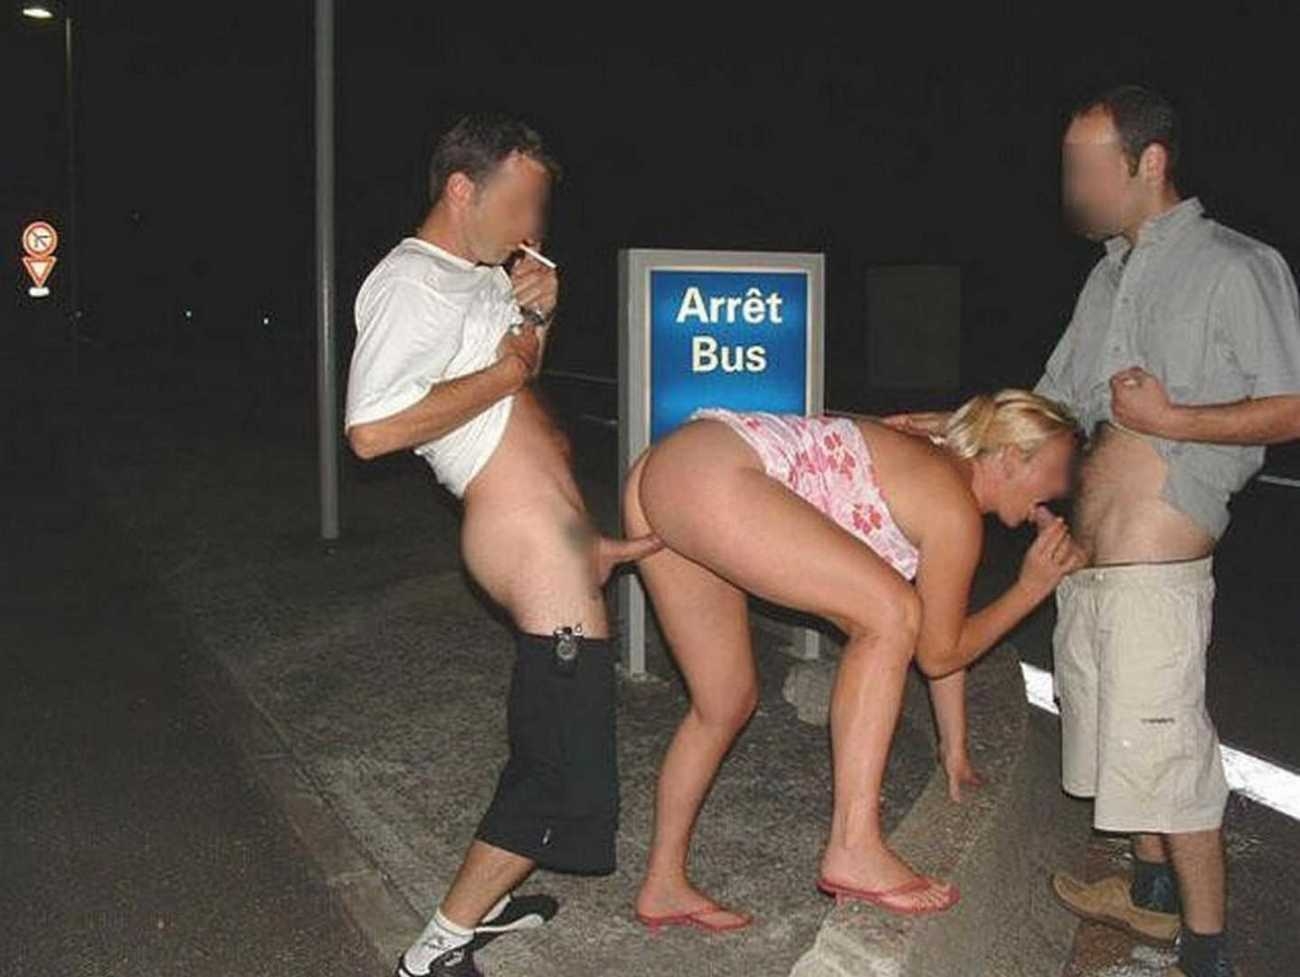 Getting fucked public with people watching free porn pictures